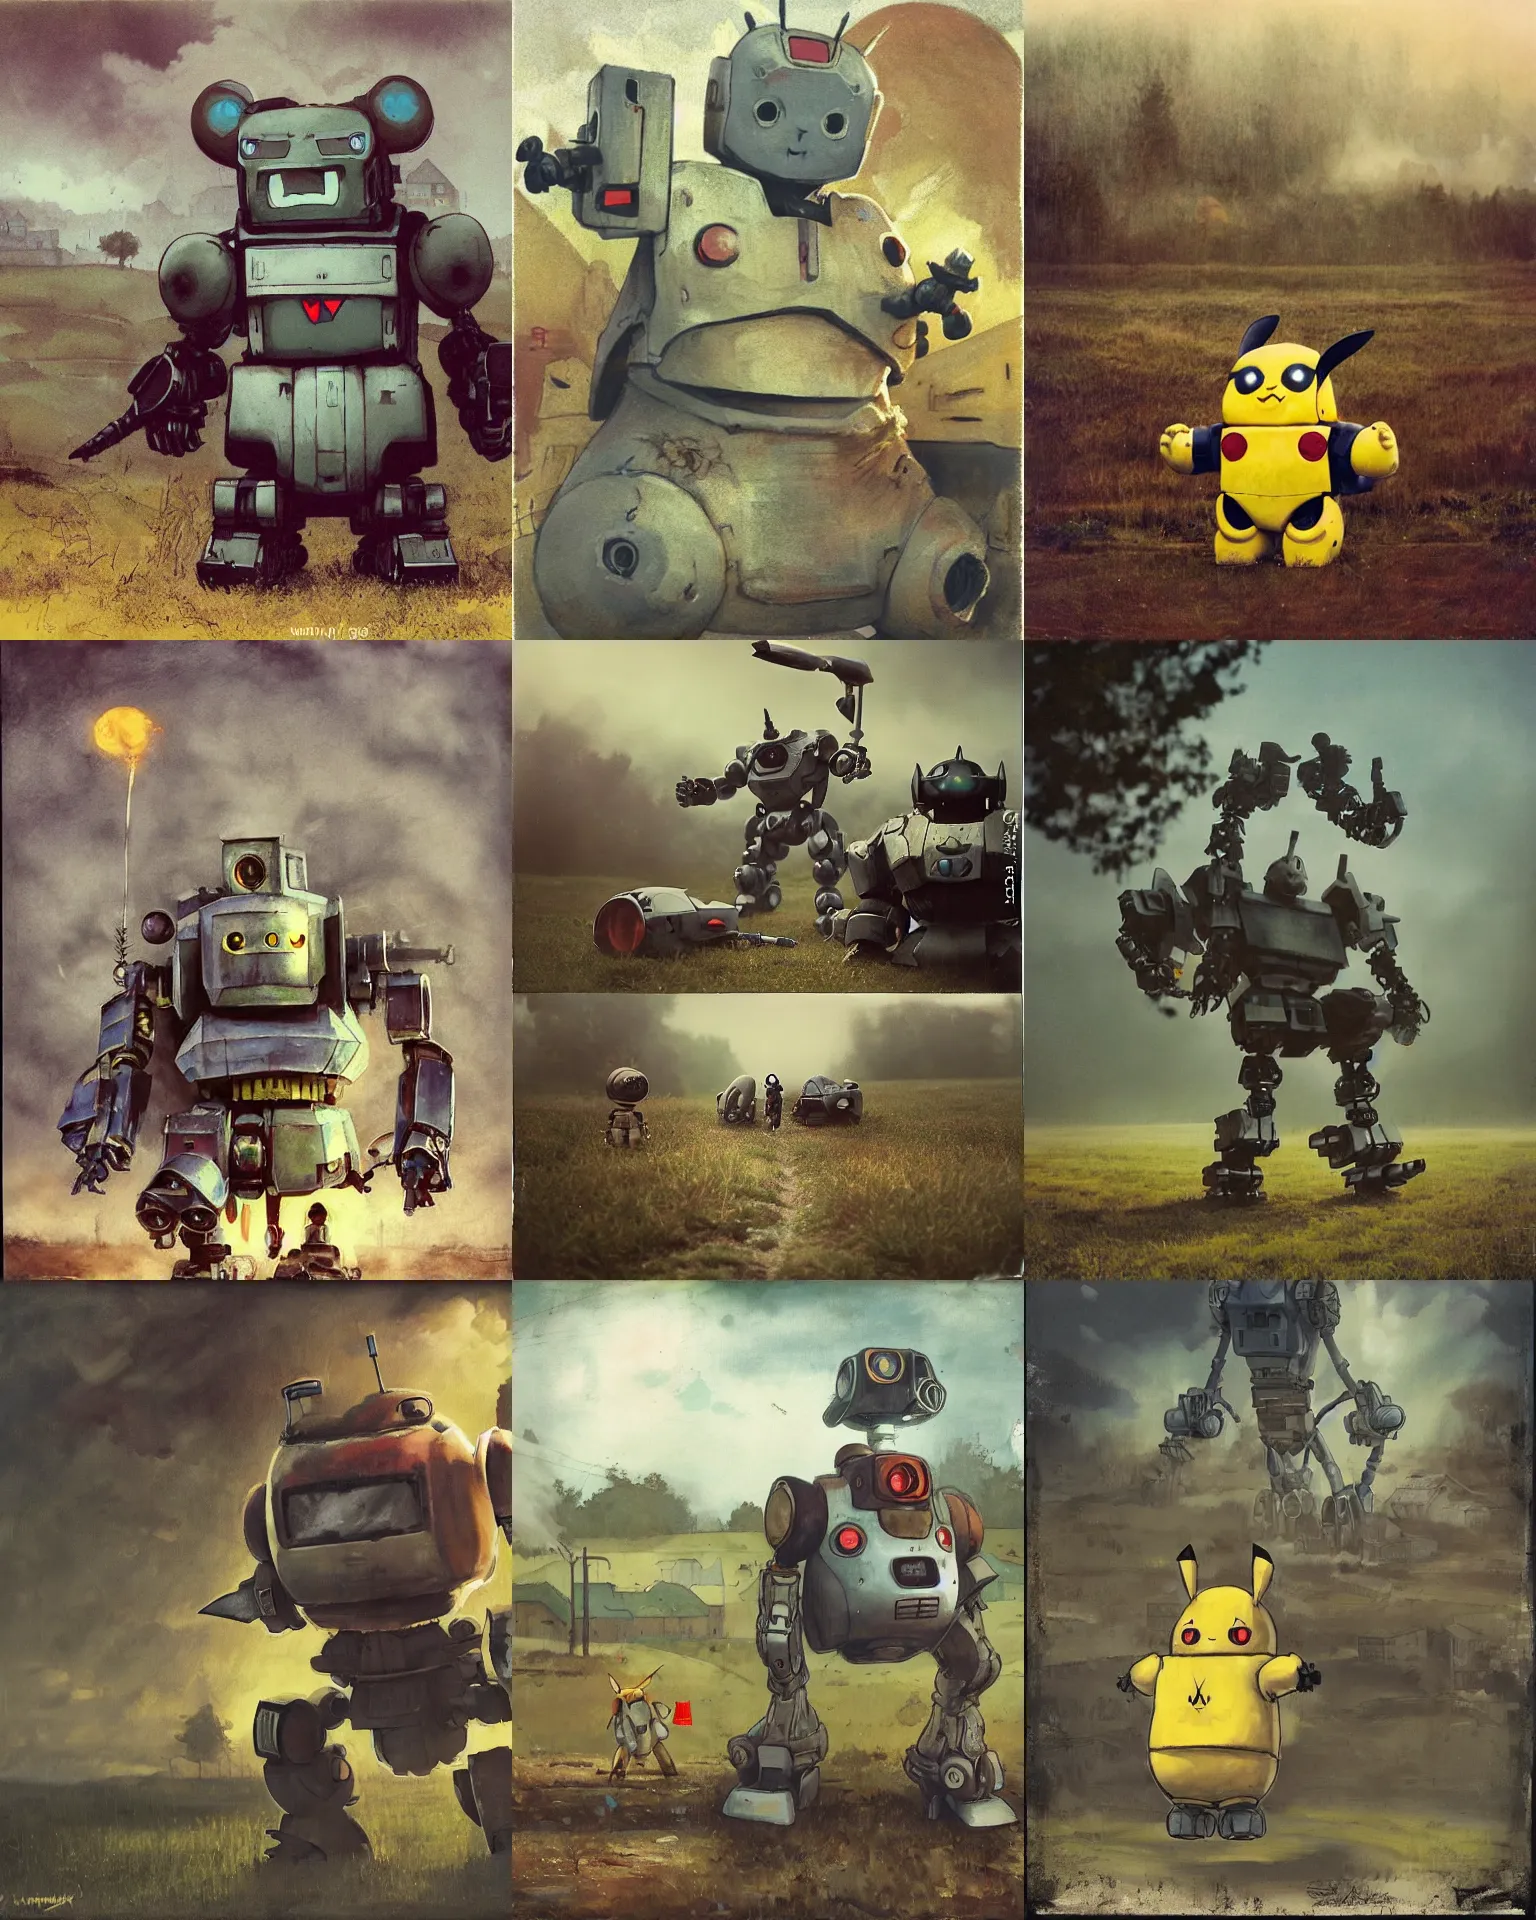 Prompt: oversized bulky scary angry evil chubby robot cyborg pikachu! battle mech with long ears attacking a rural village , Cinematic focus, Polaroid photo, vintage, neutral colors, soft lights, foggy, mist, by Steve Hanks, by Serov Valentin, by lisa yuskavage, by Andrei Tarkovsky